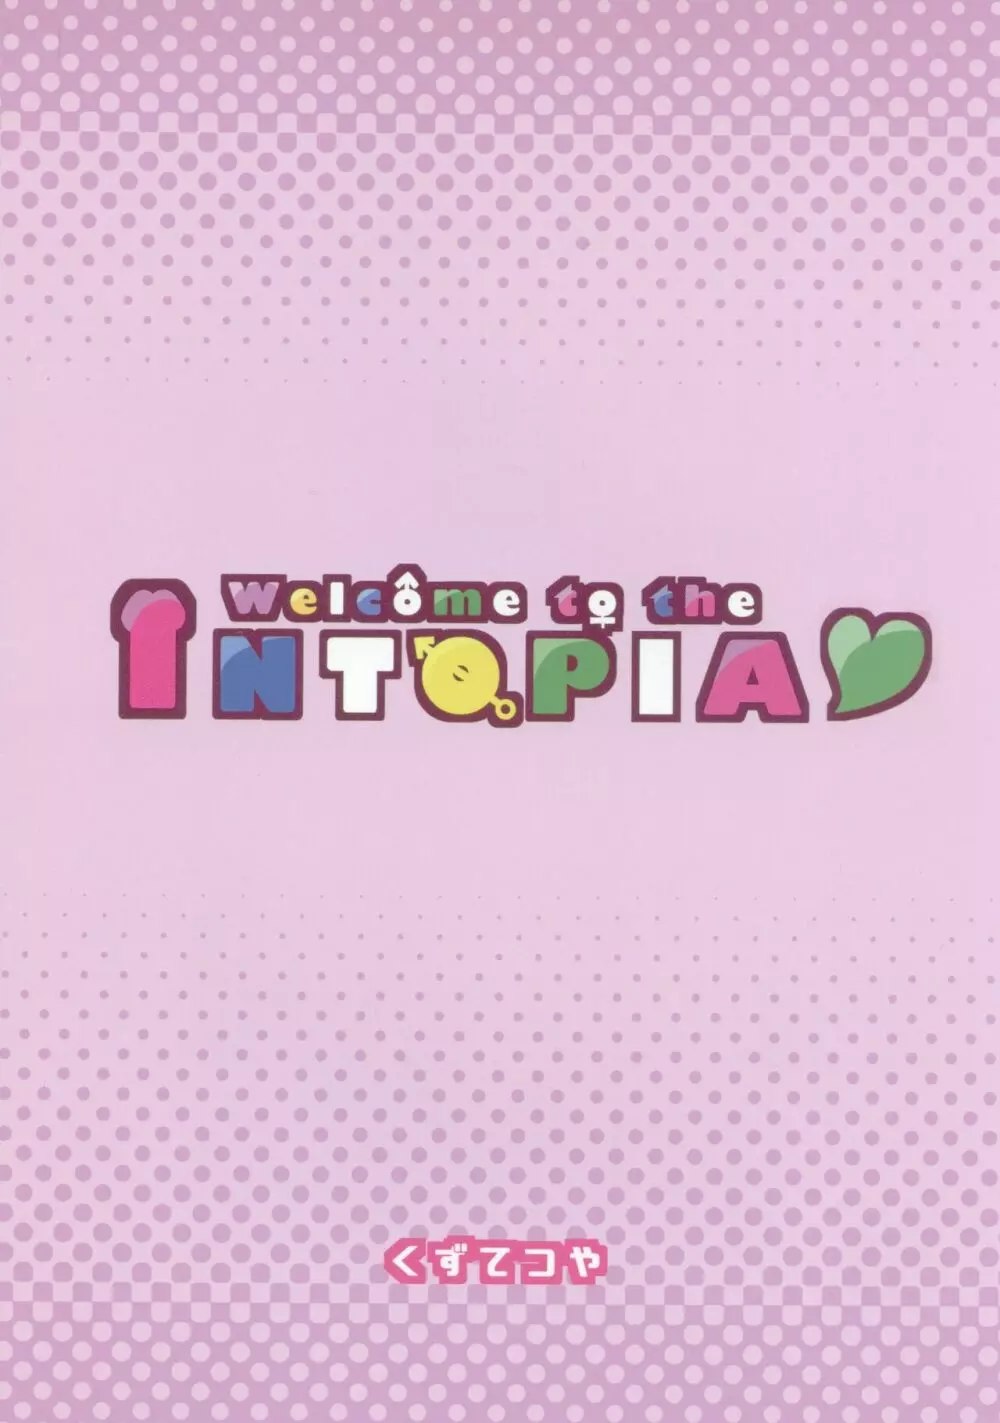 Welcome to the Intopia♥ 26ページ